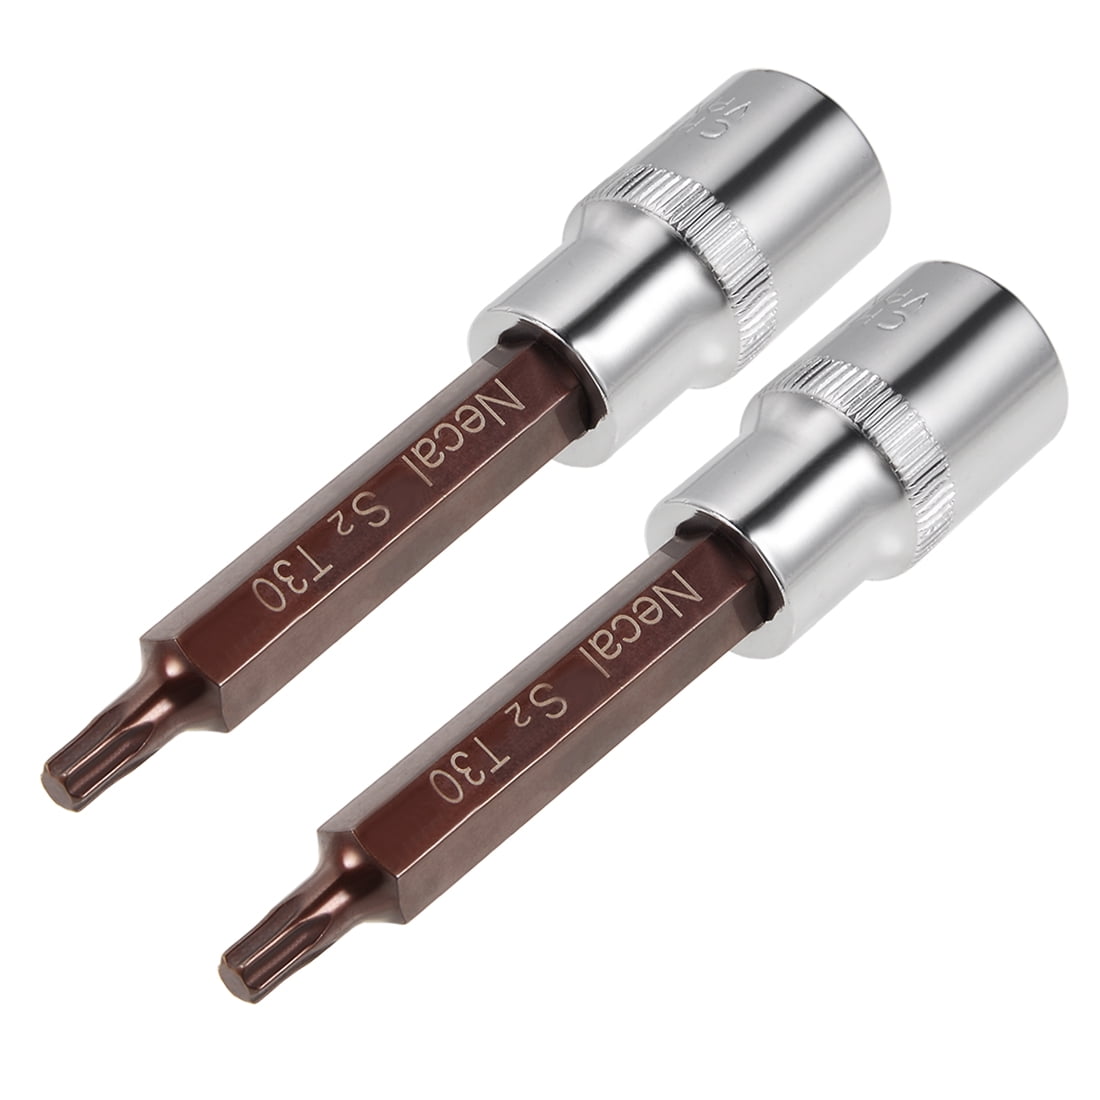 TORX bits in all sizes - also single bits ✓ High-quality S2 steel ✓  Magnetic ✓ ¼ inch drive ✓